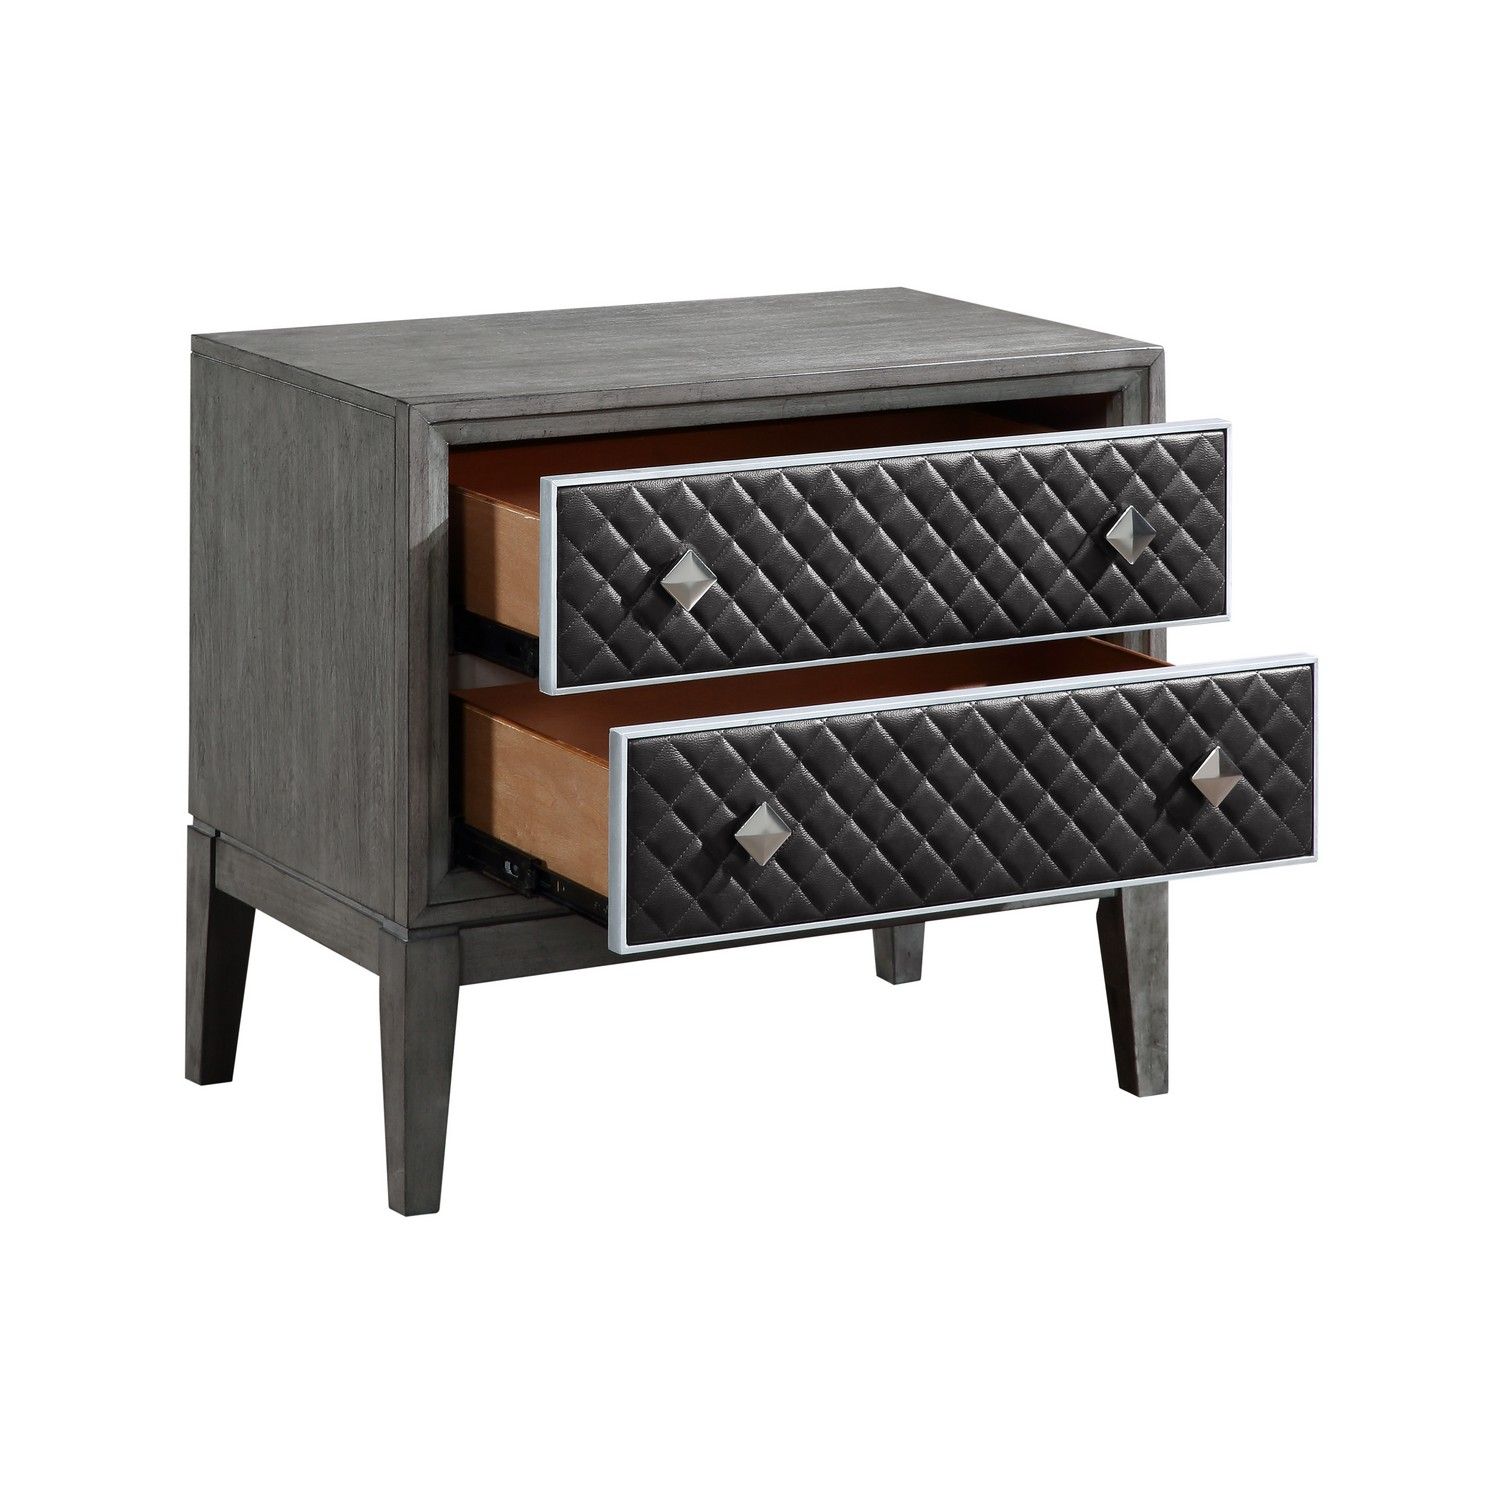 Homelegance West End Night Stand - Wire-brushed Gray